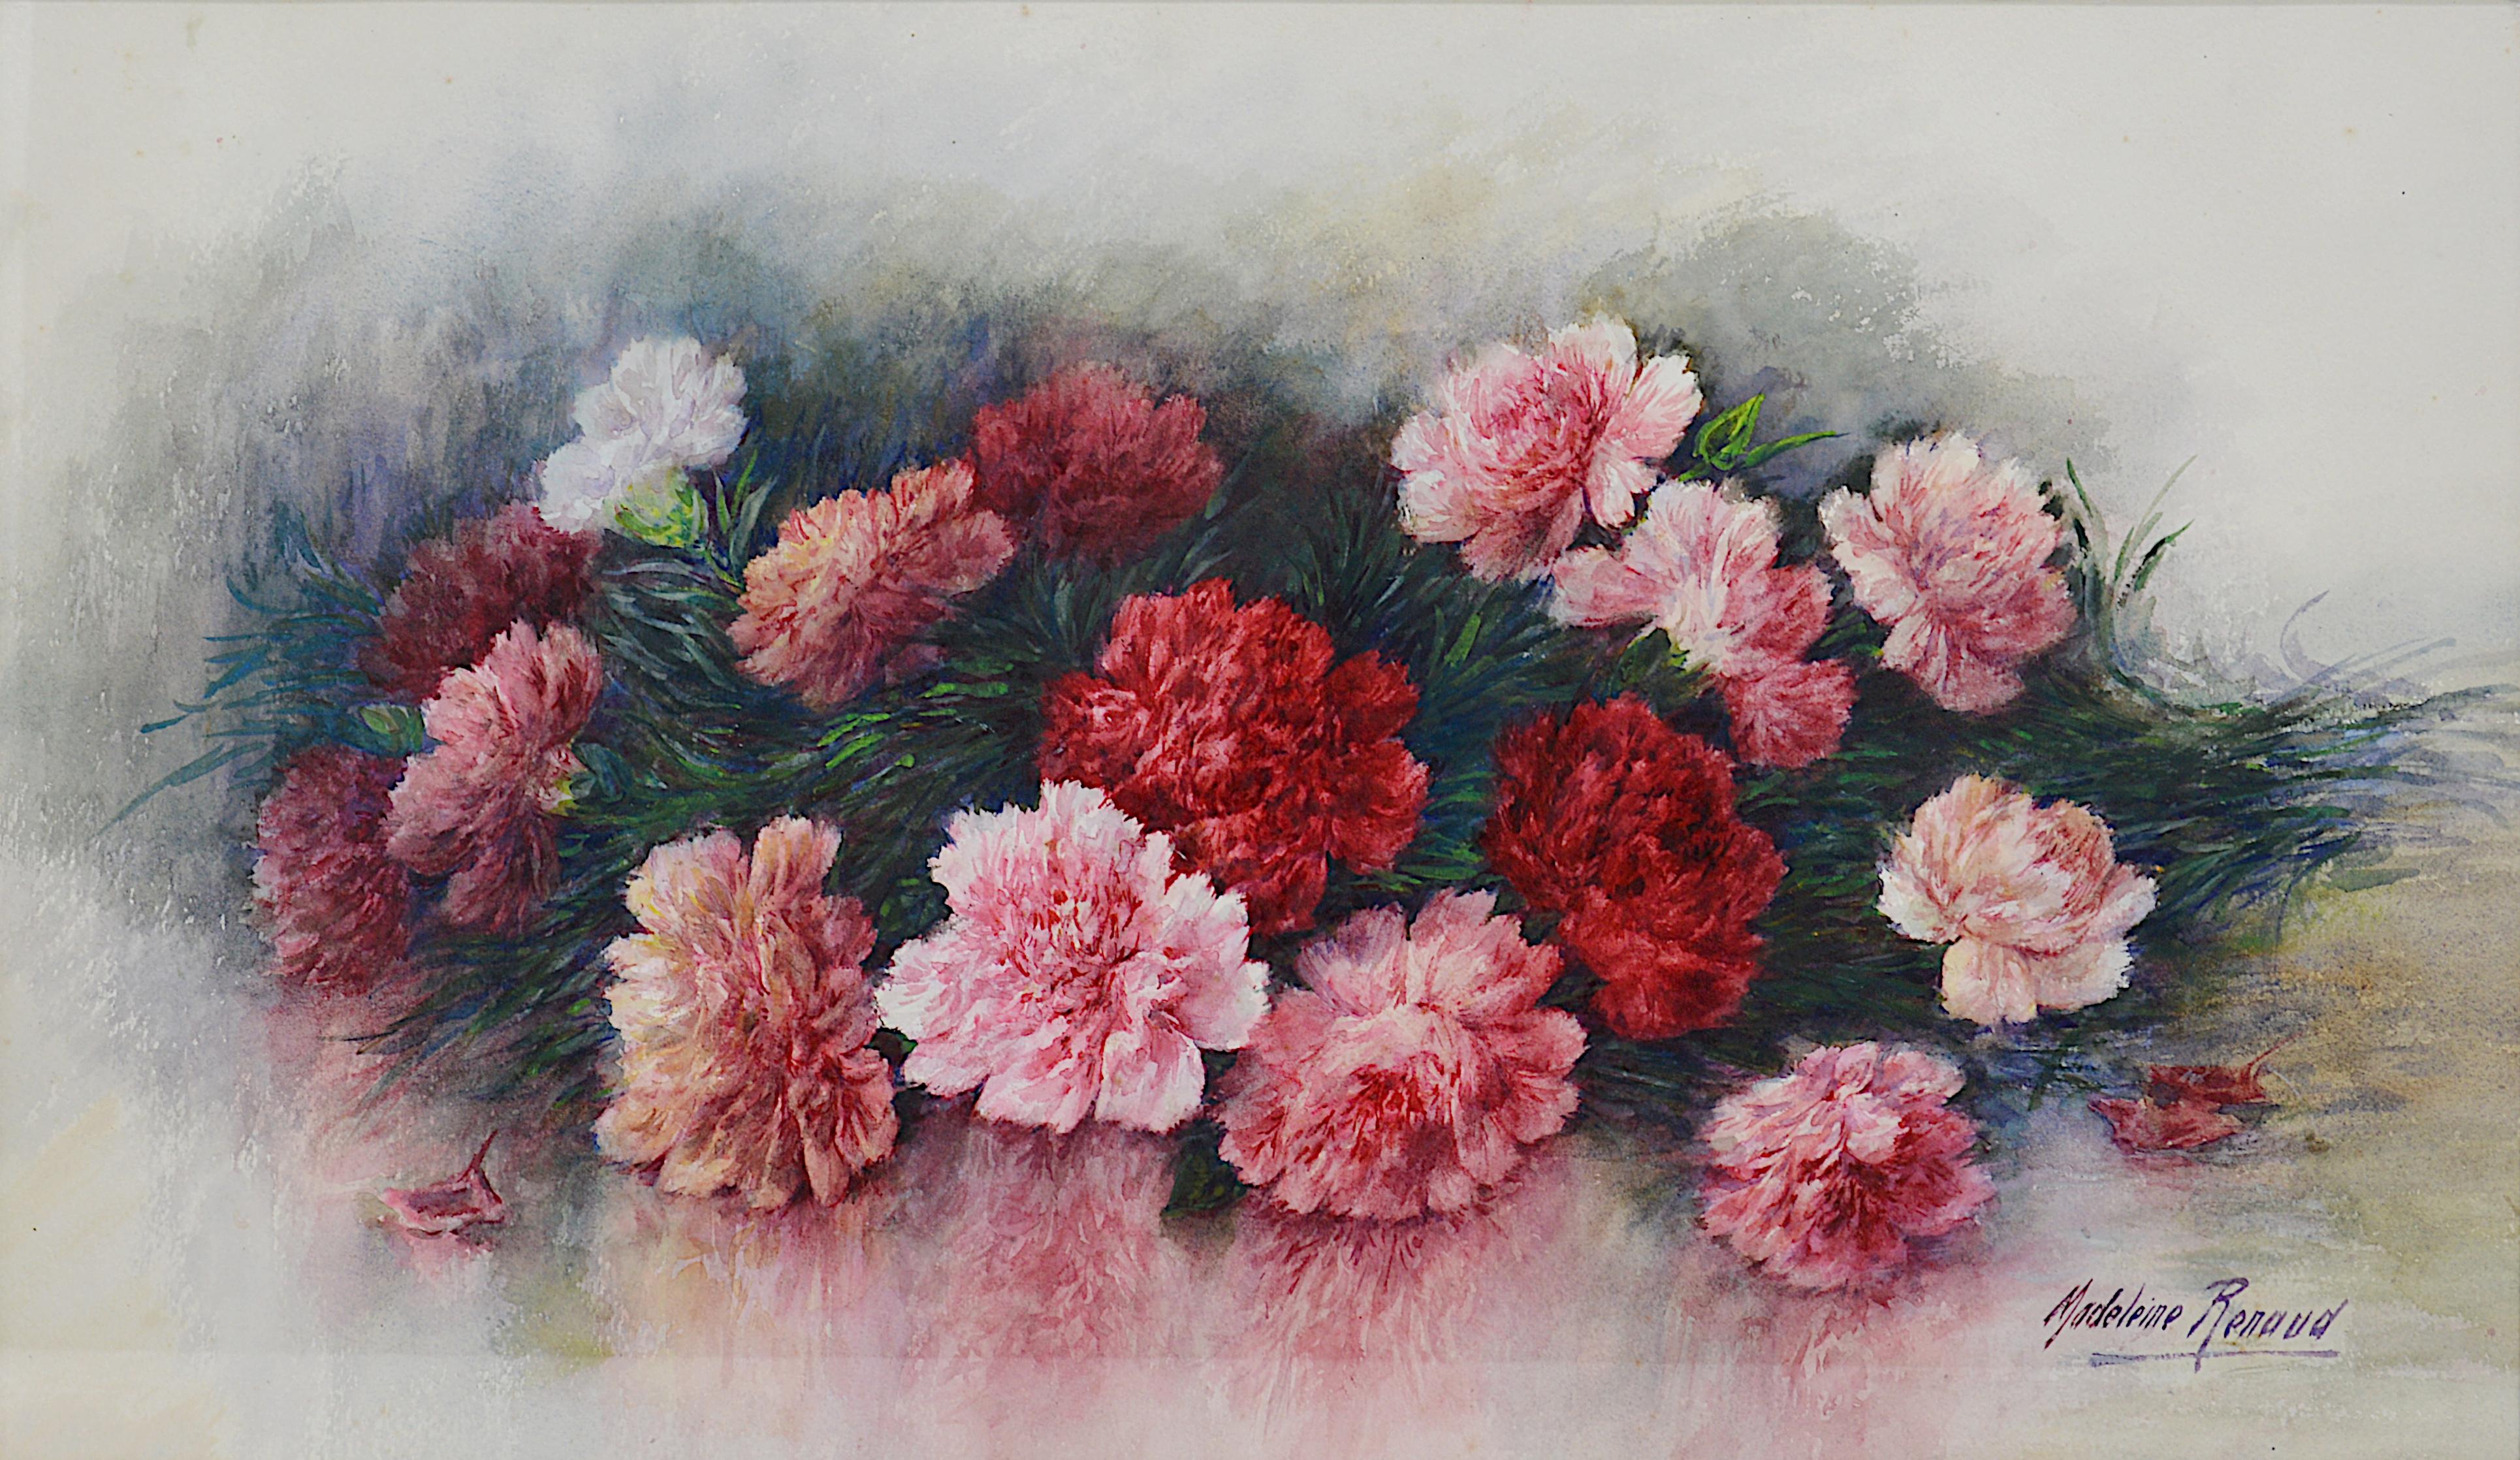 Madeleine RENAUD, Watercolor, The Wreath Of Carnations - Art by Madeleine Renaud